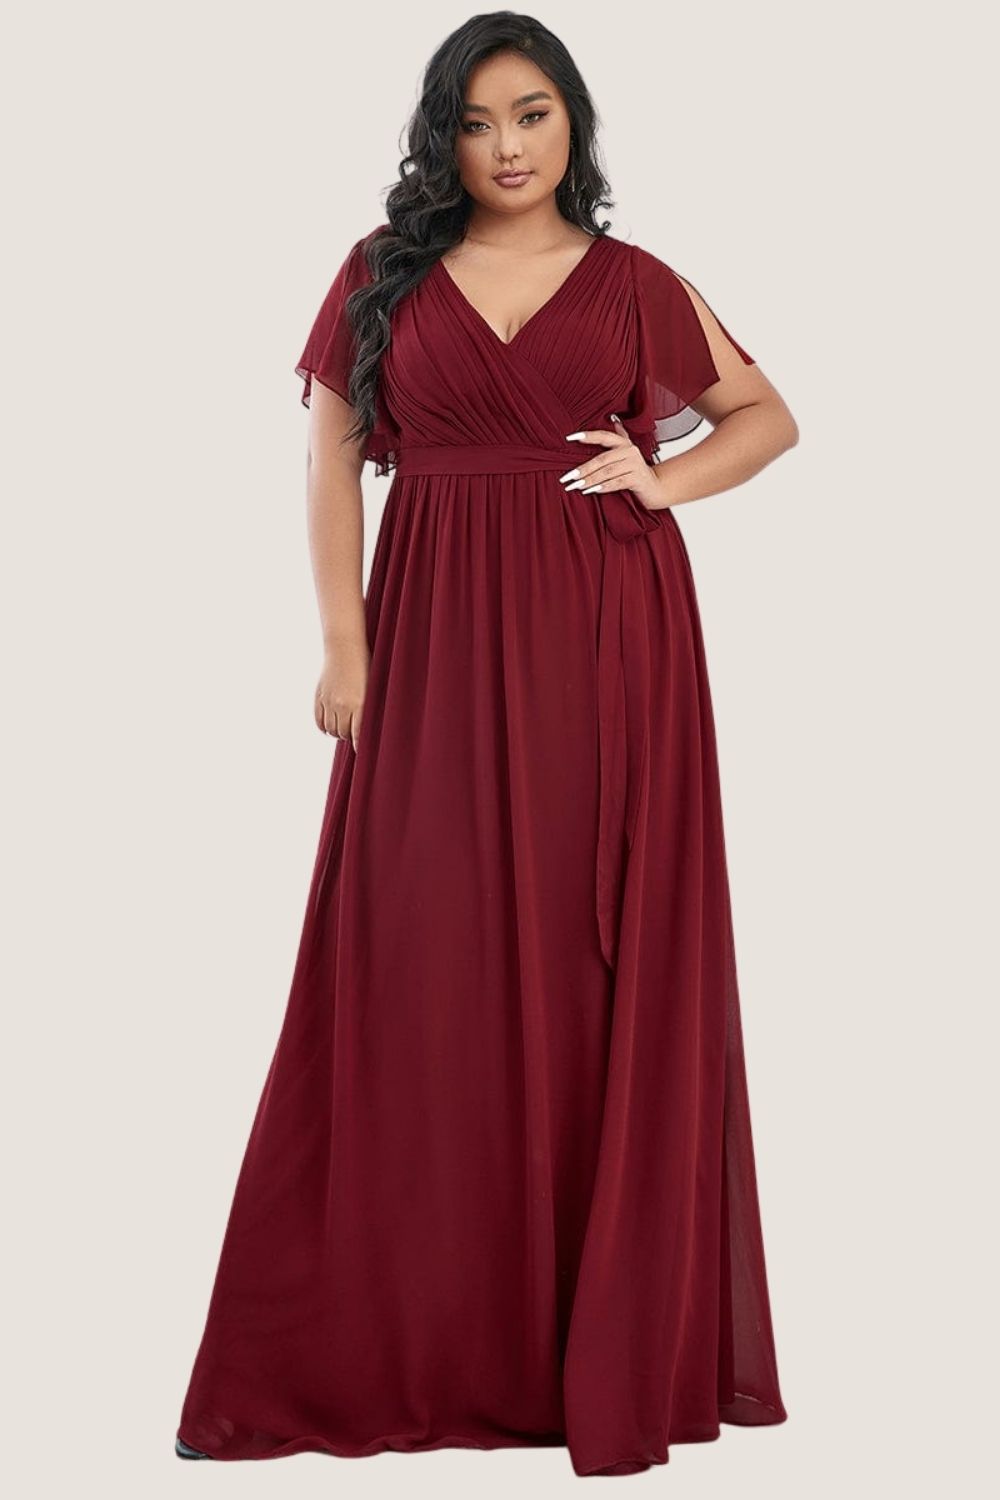 Try Before You Buy Emma Bridesmaid Dress by Dressology